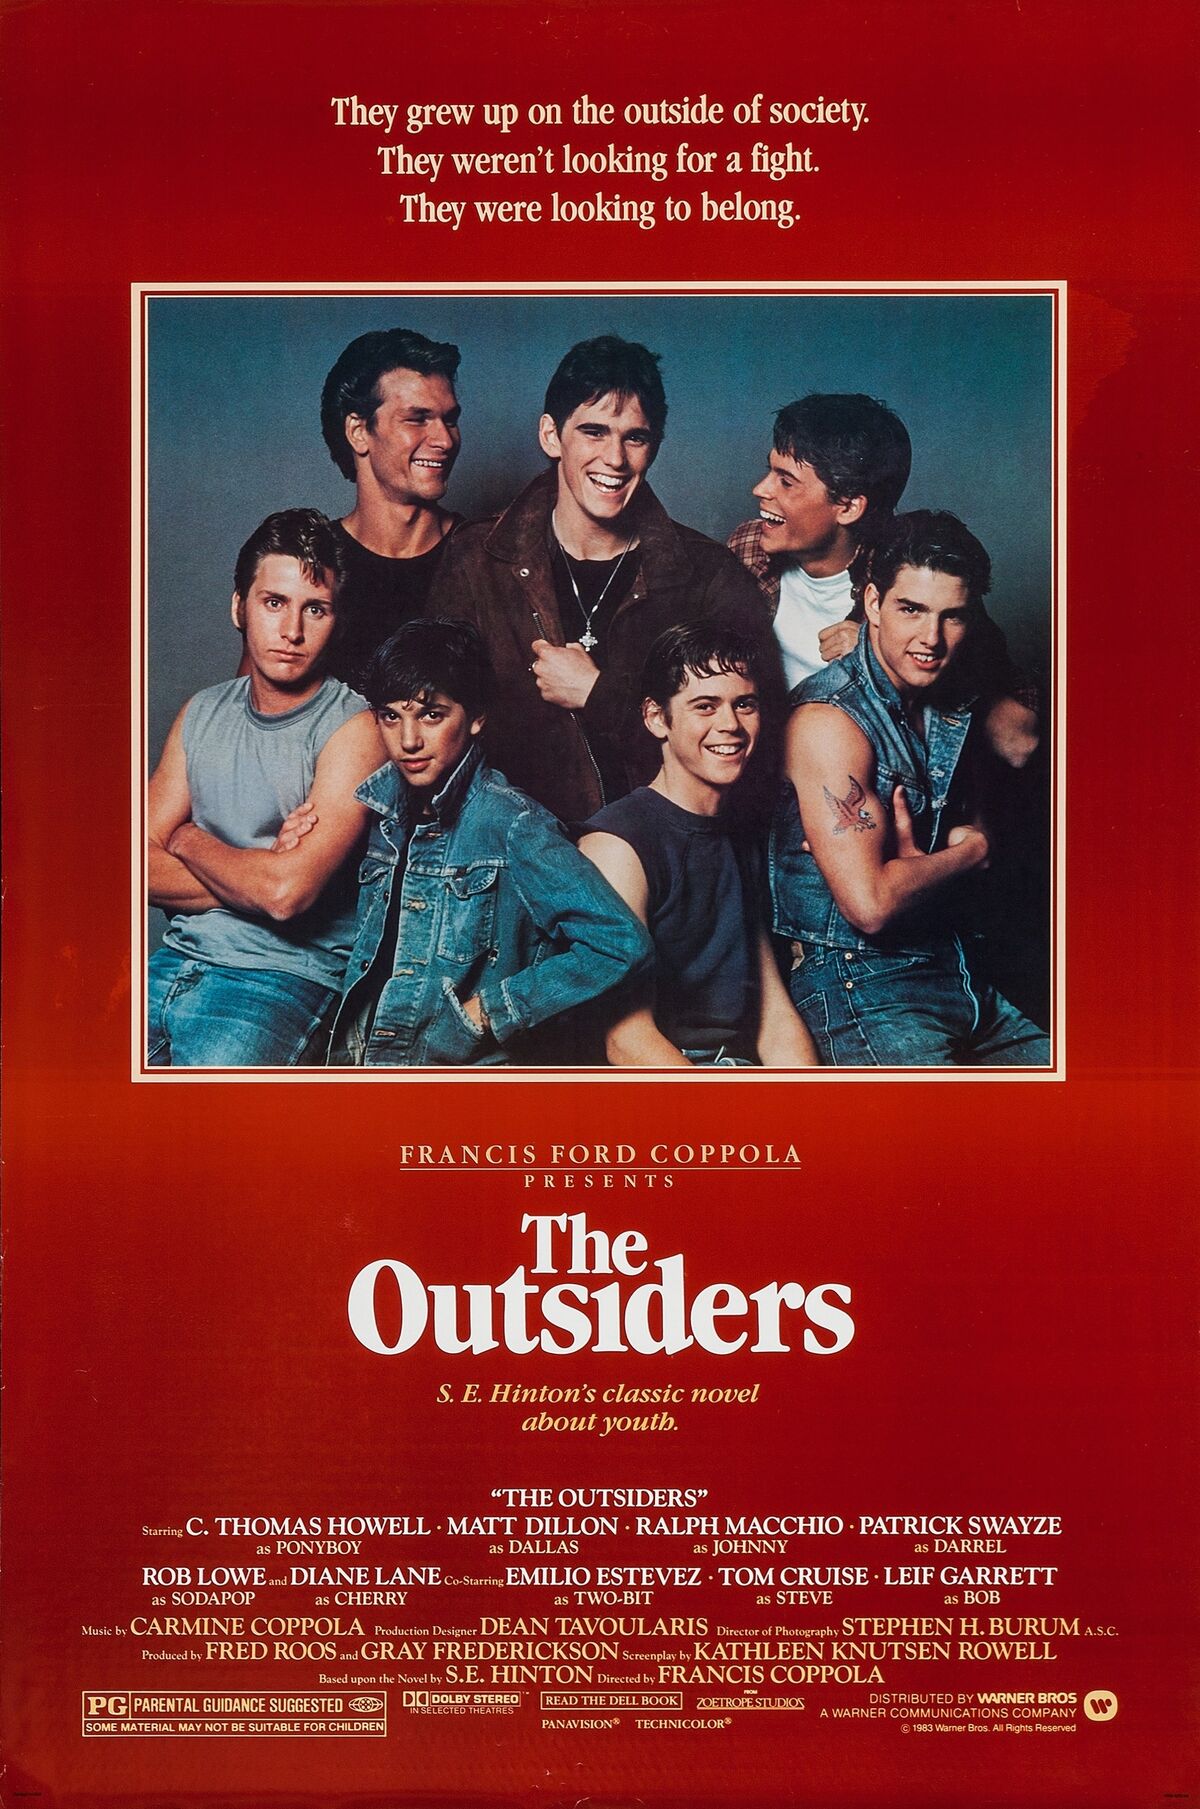 The Outsiders (film), Warner Bros. Entertainment Wiki